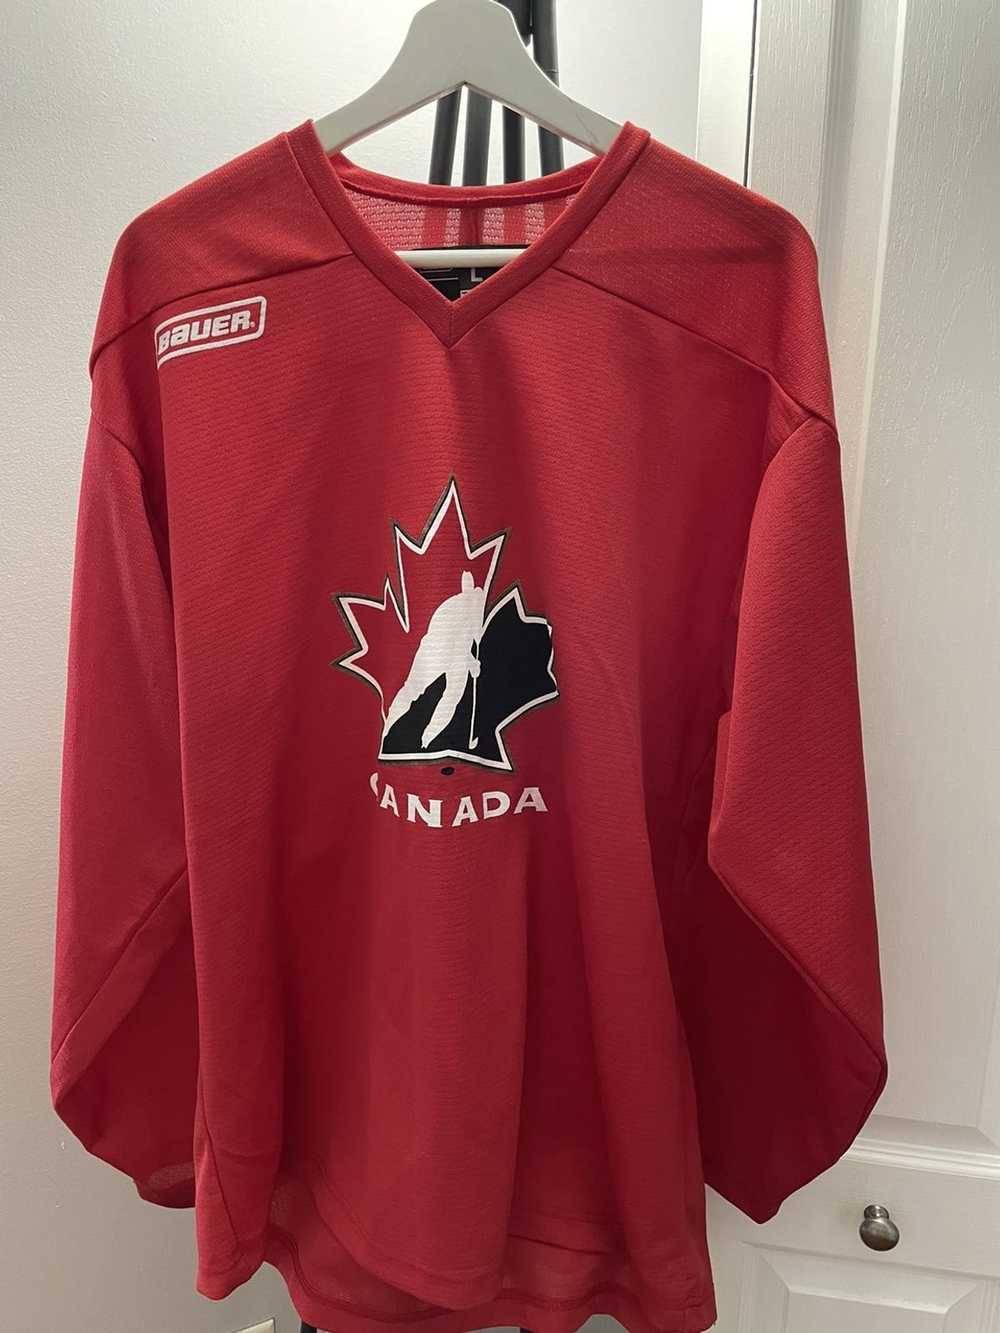 Nike Bauer Team Canada Hockey Jersey Home Red Long Sleeve Youth L/XL